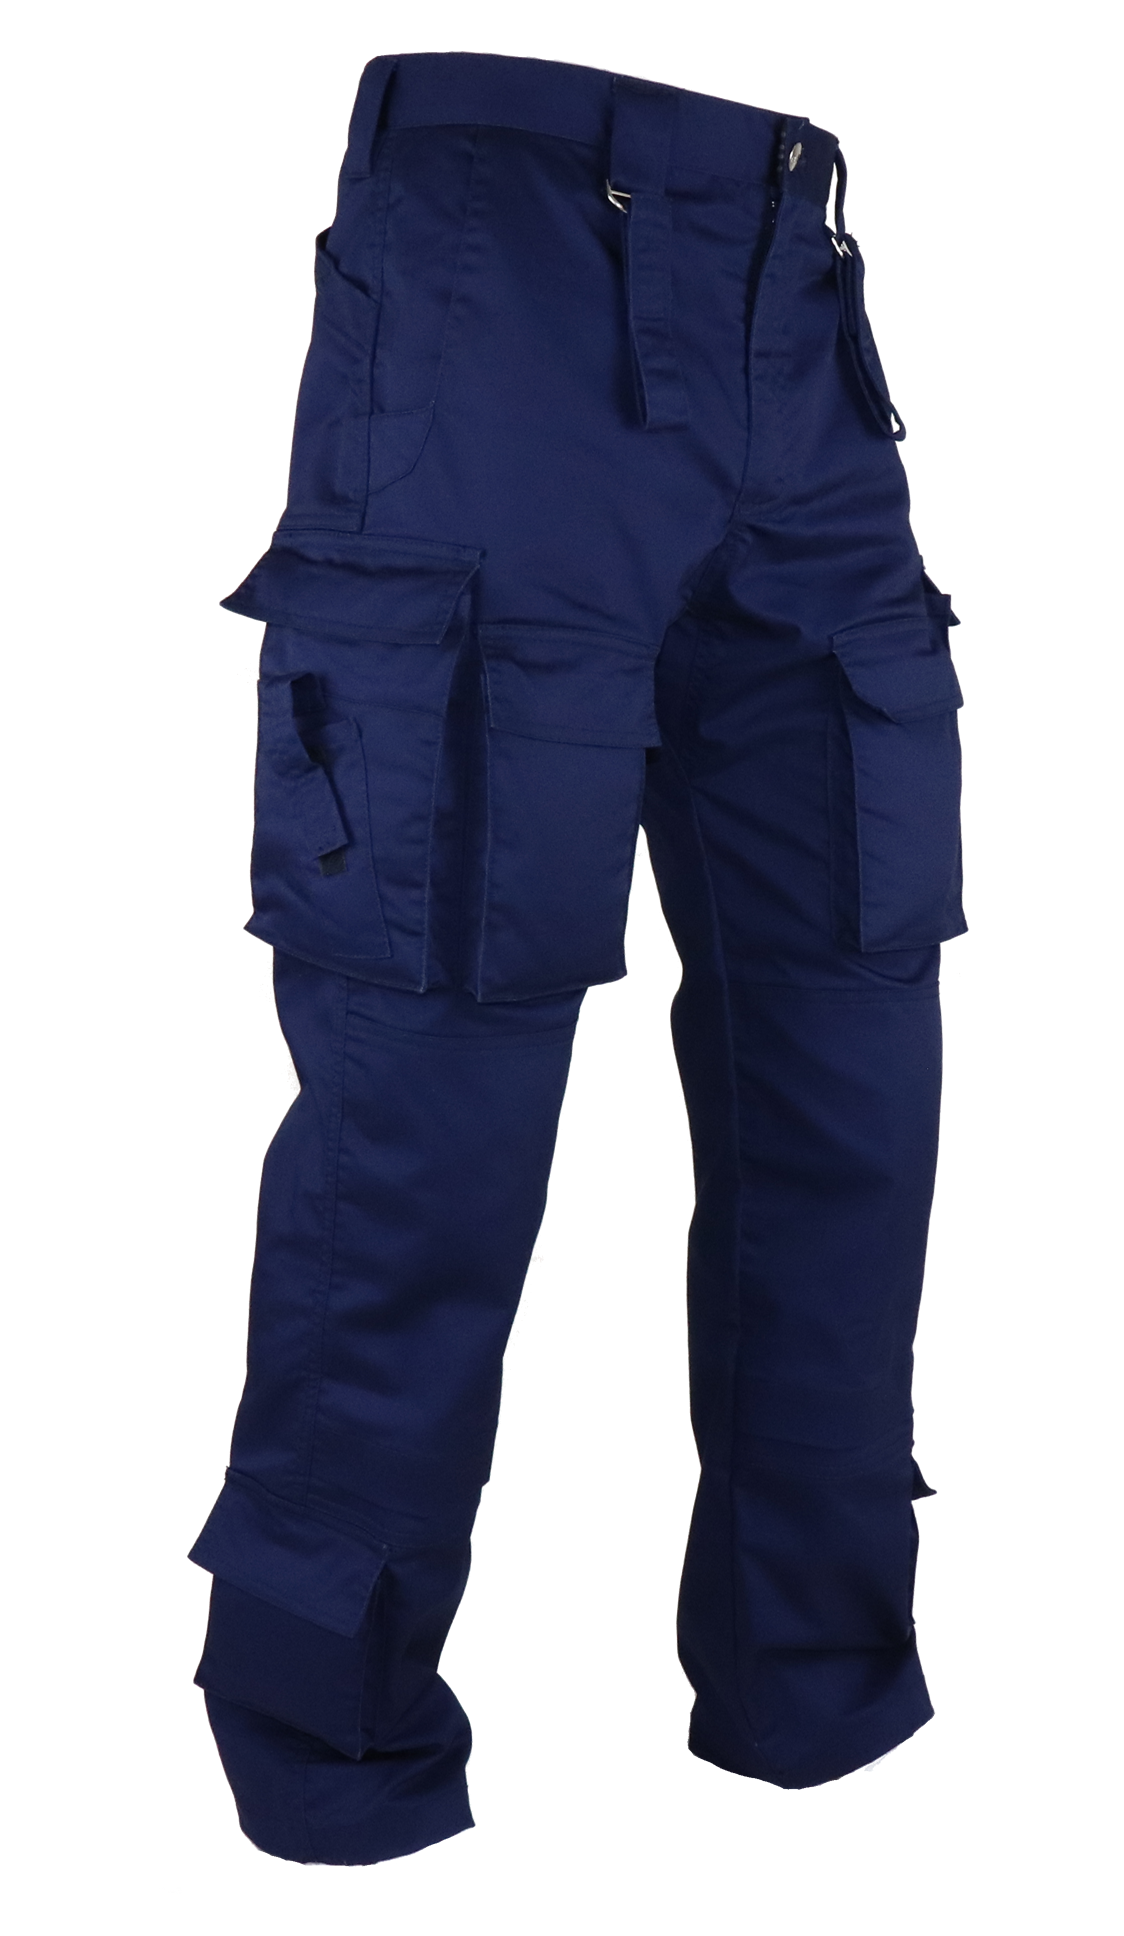 Niton999 - Everyone ♥️'s the Niton Tactical EMS Trousers.... | Facebook